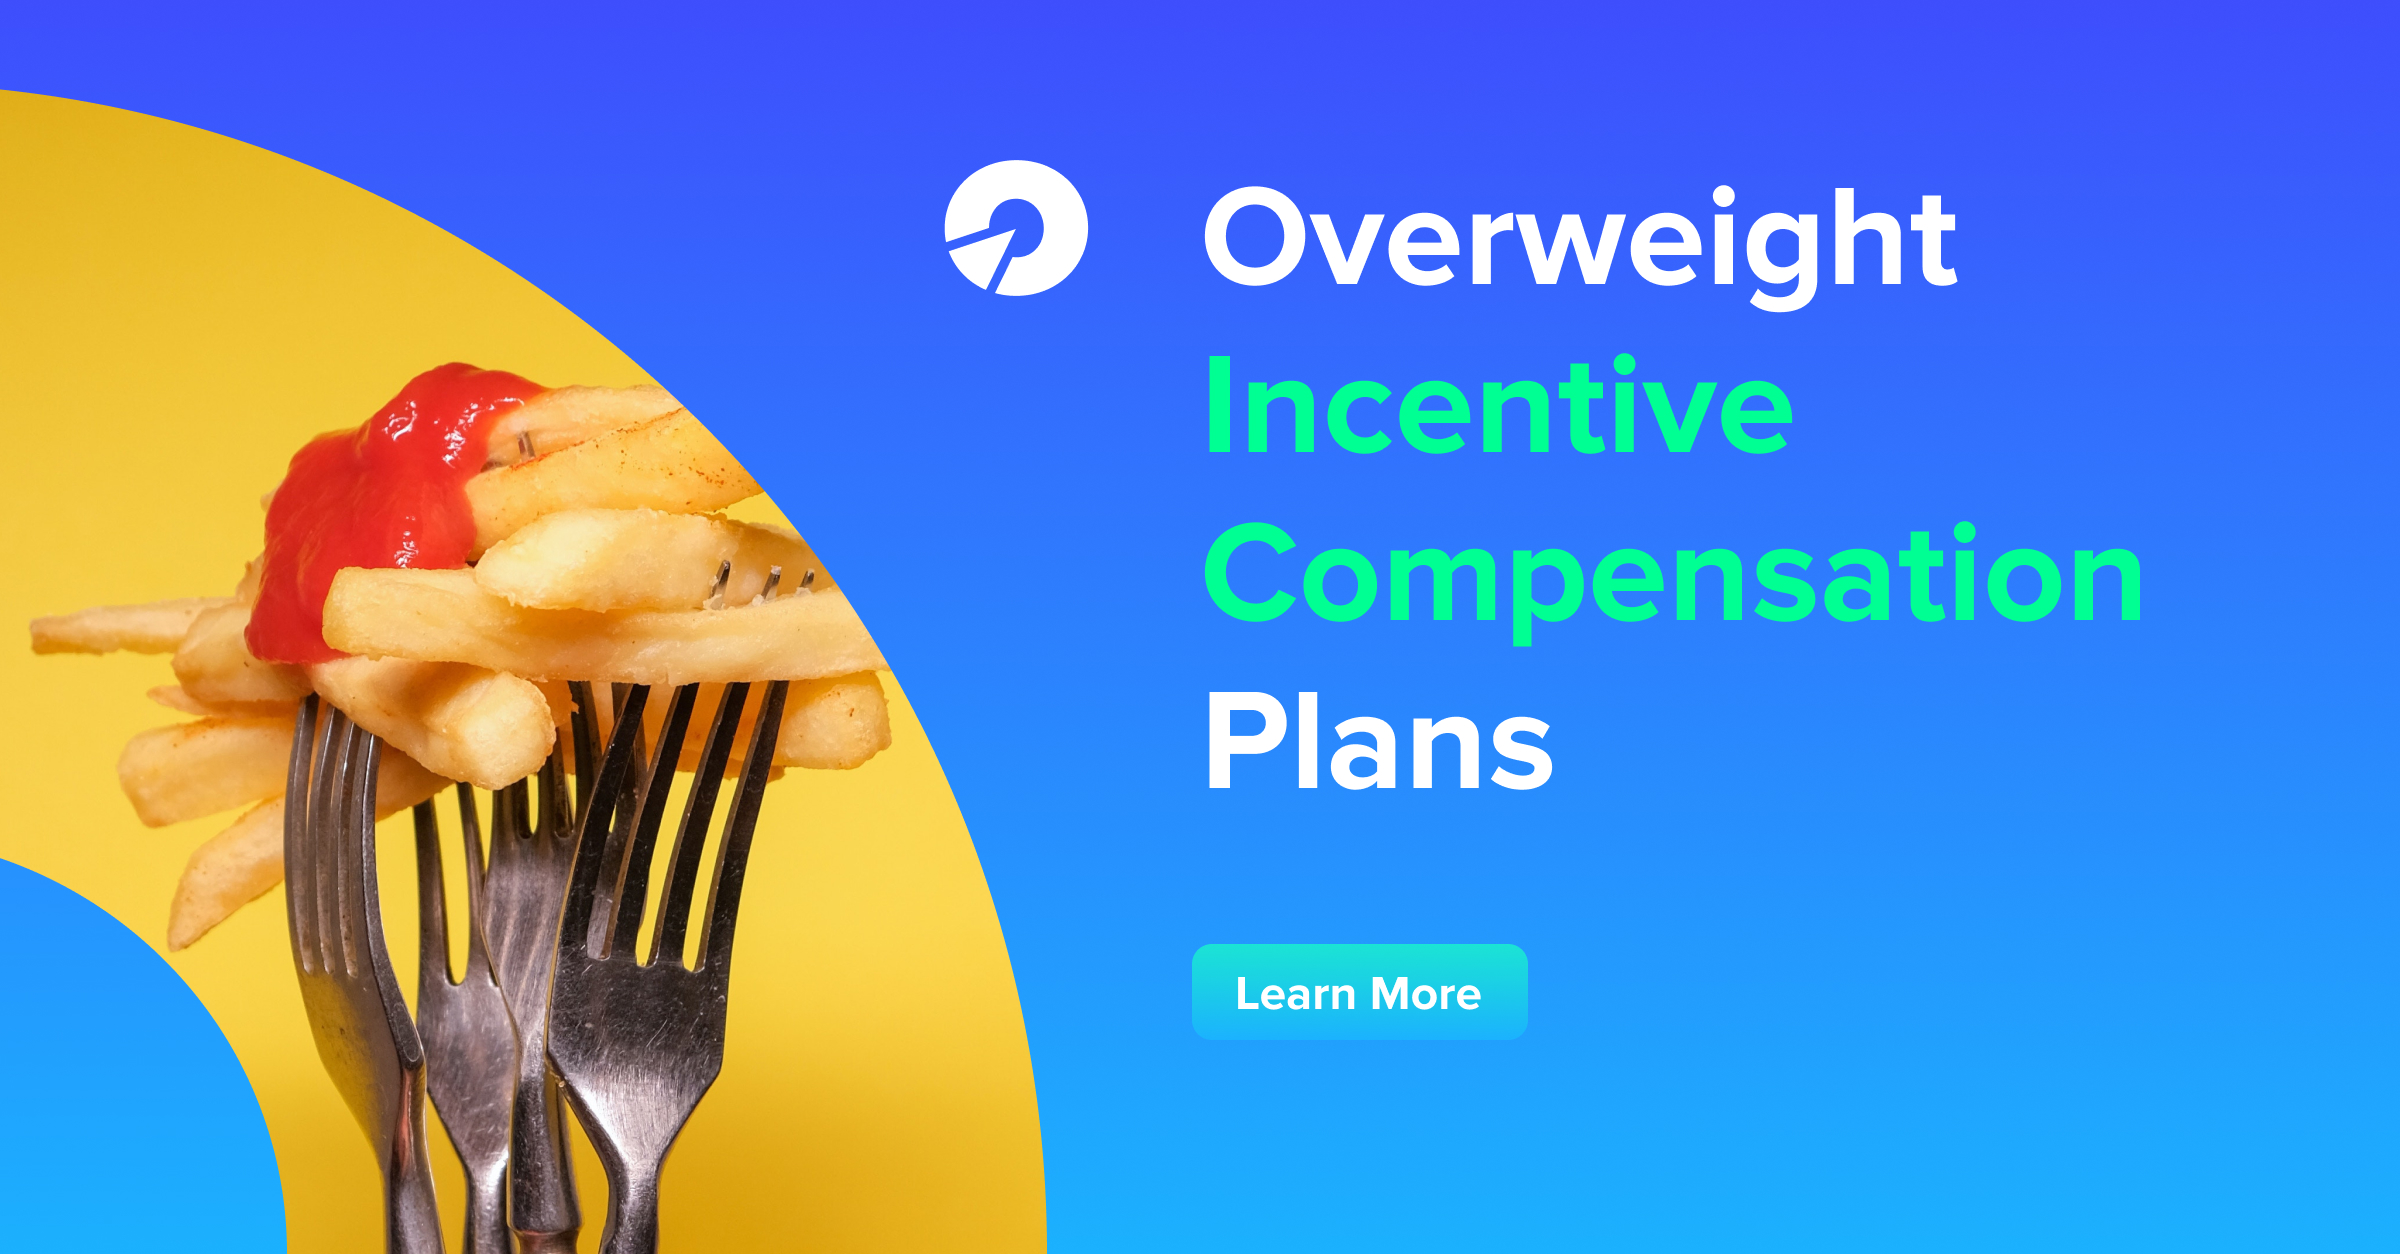 Overweight Incentive Plans